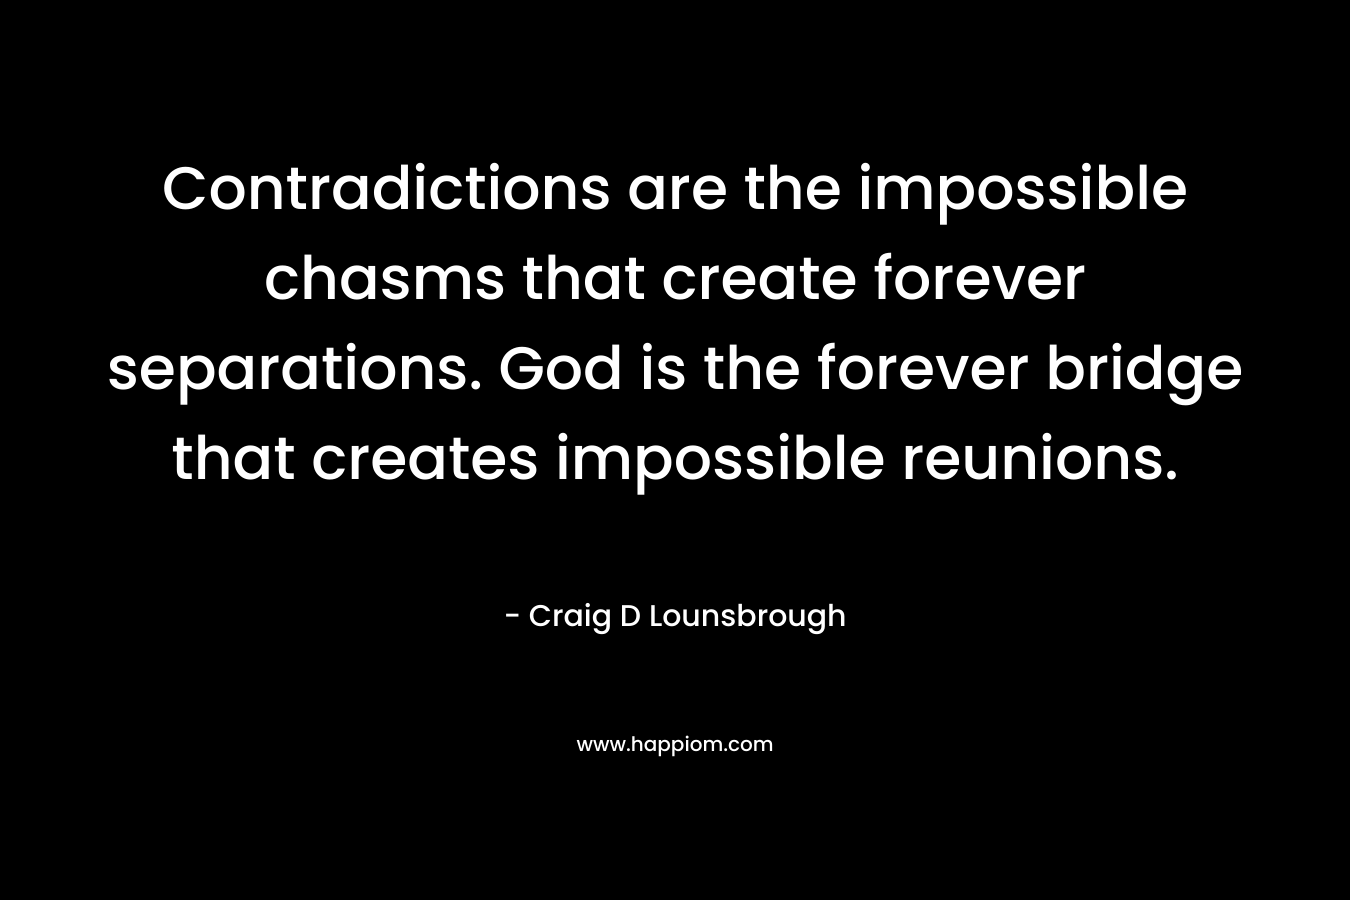 Contradictions are the impossible chasms that create forever separations. God is the forever bridge that creates impossible reunions.